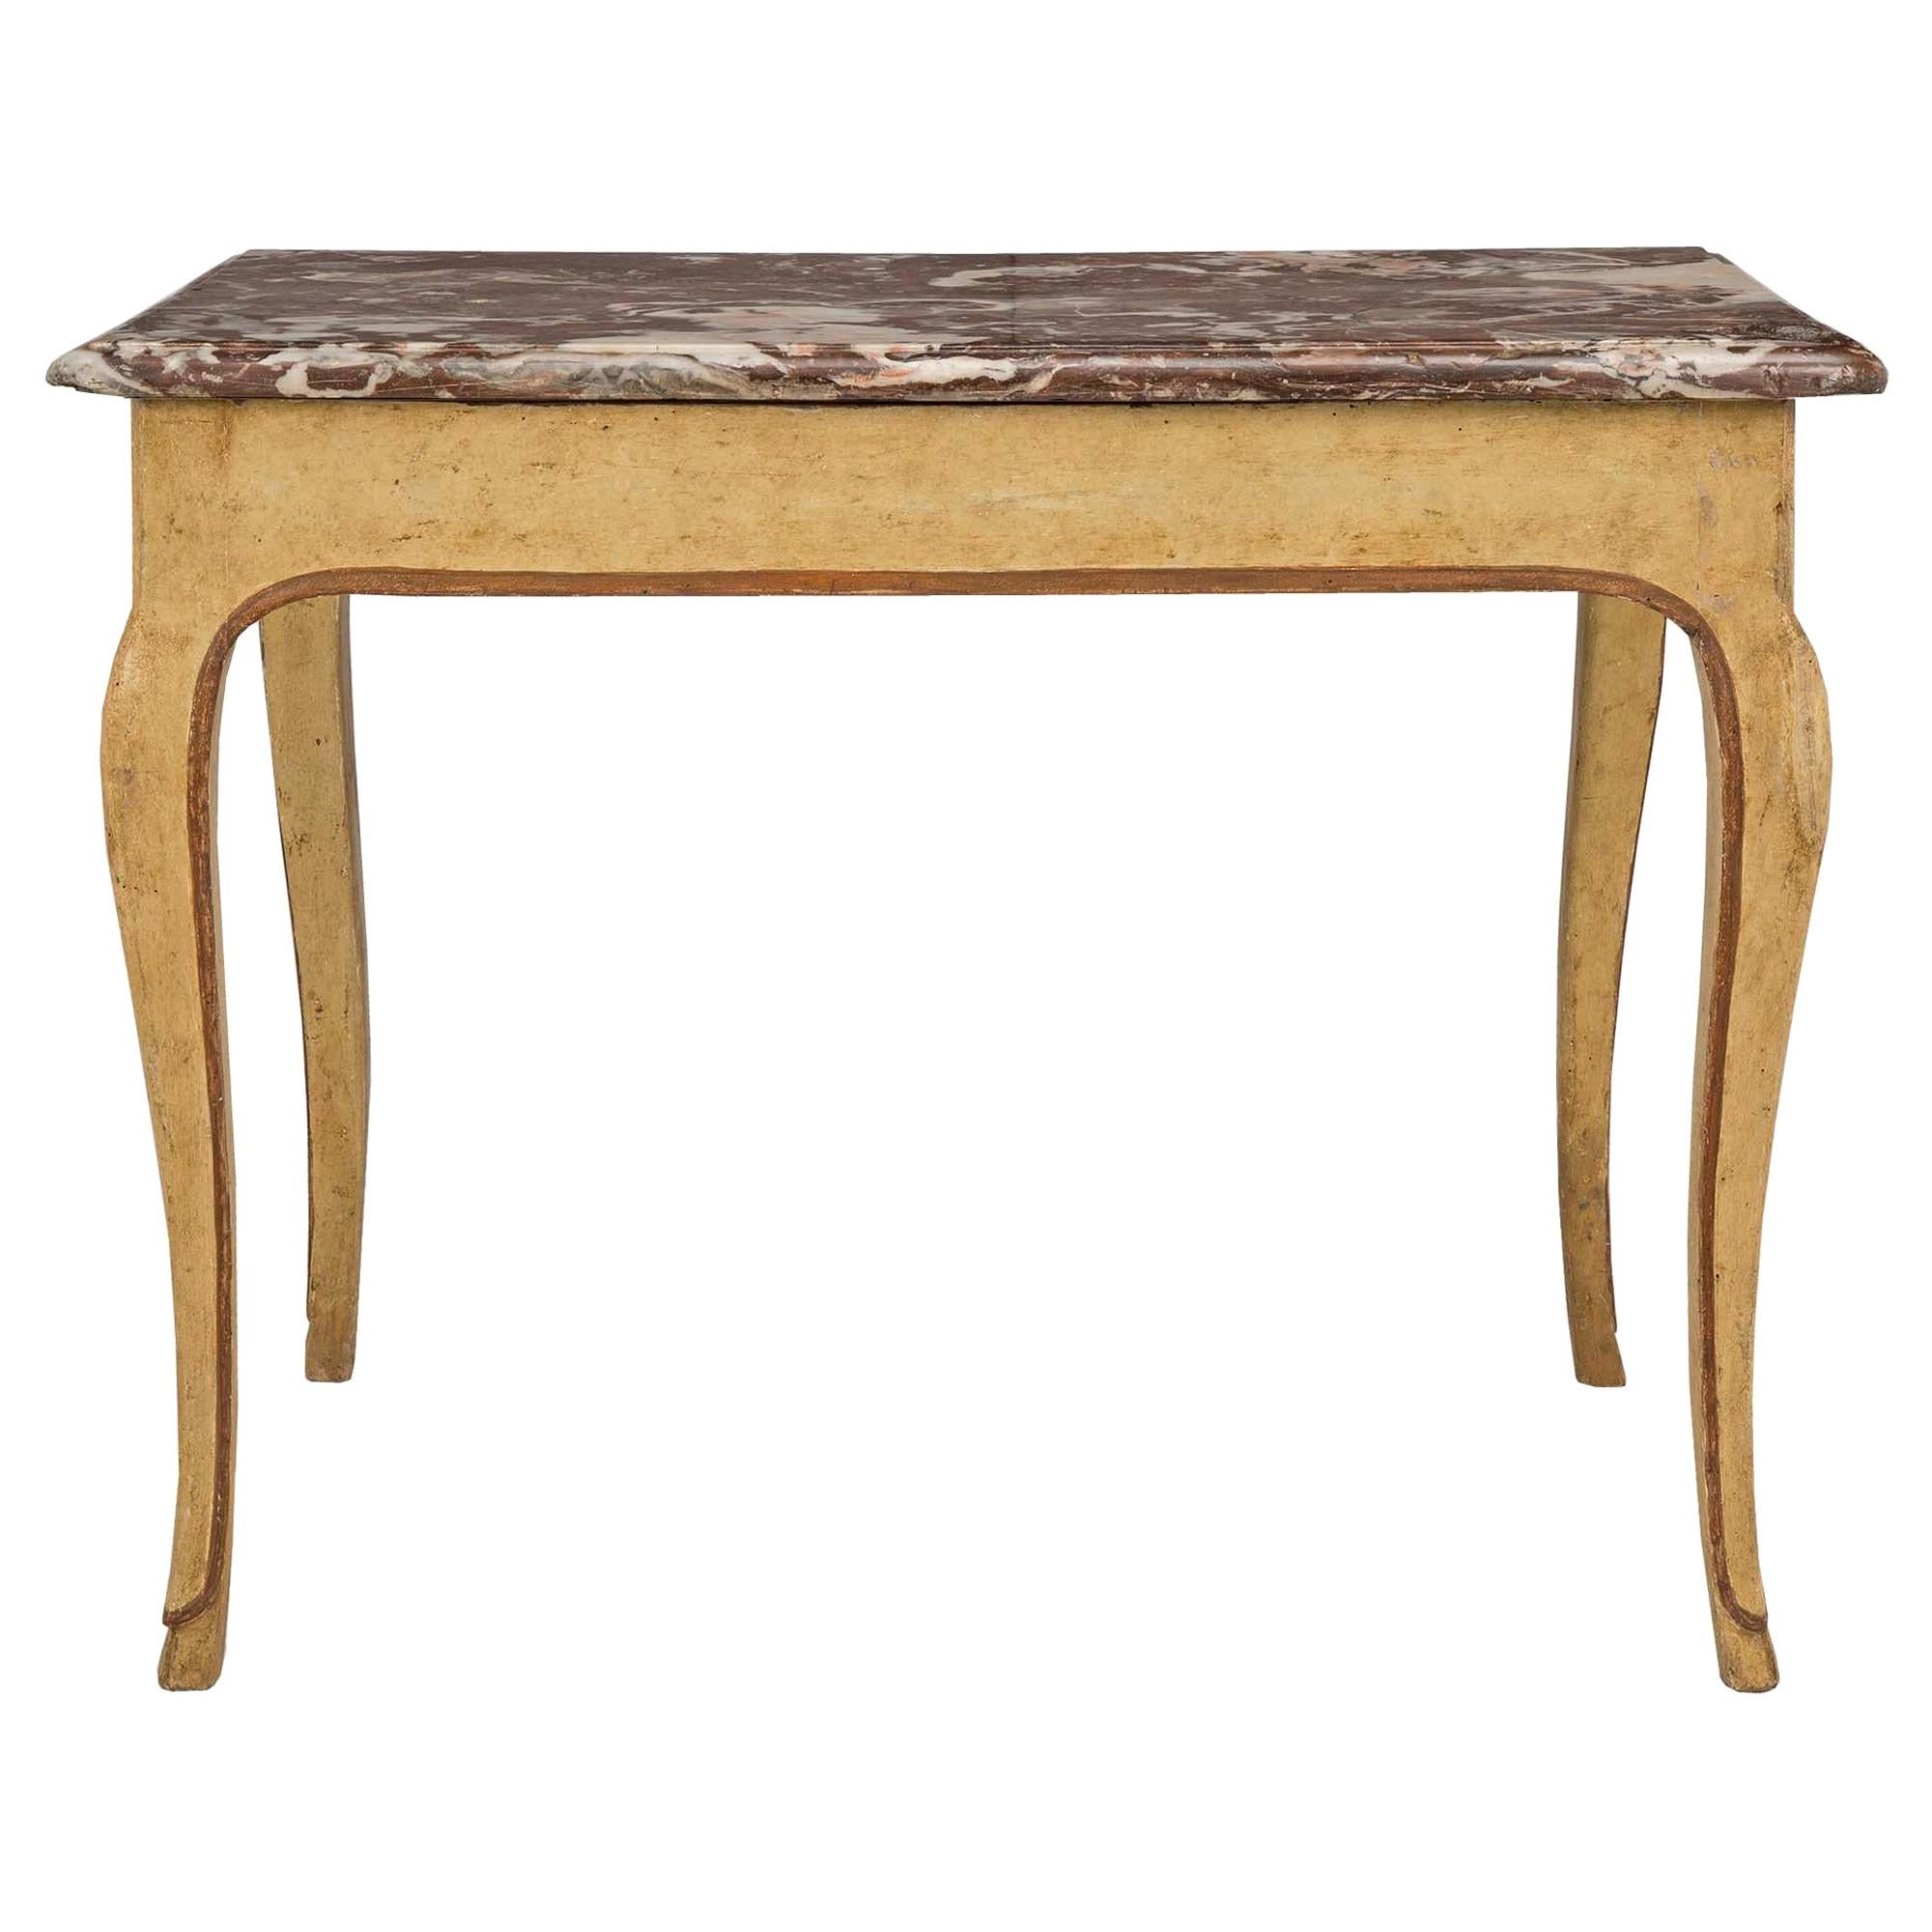 Italian 18th Century Louis XV Period Patinated Side Table